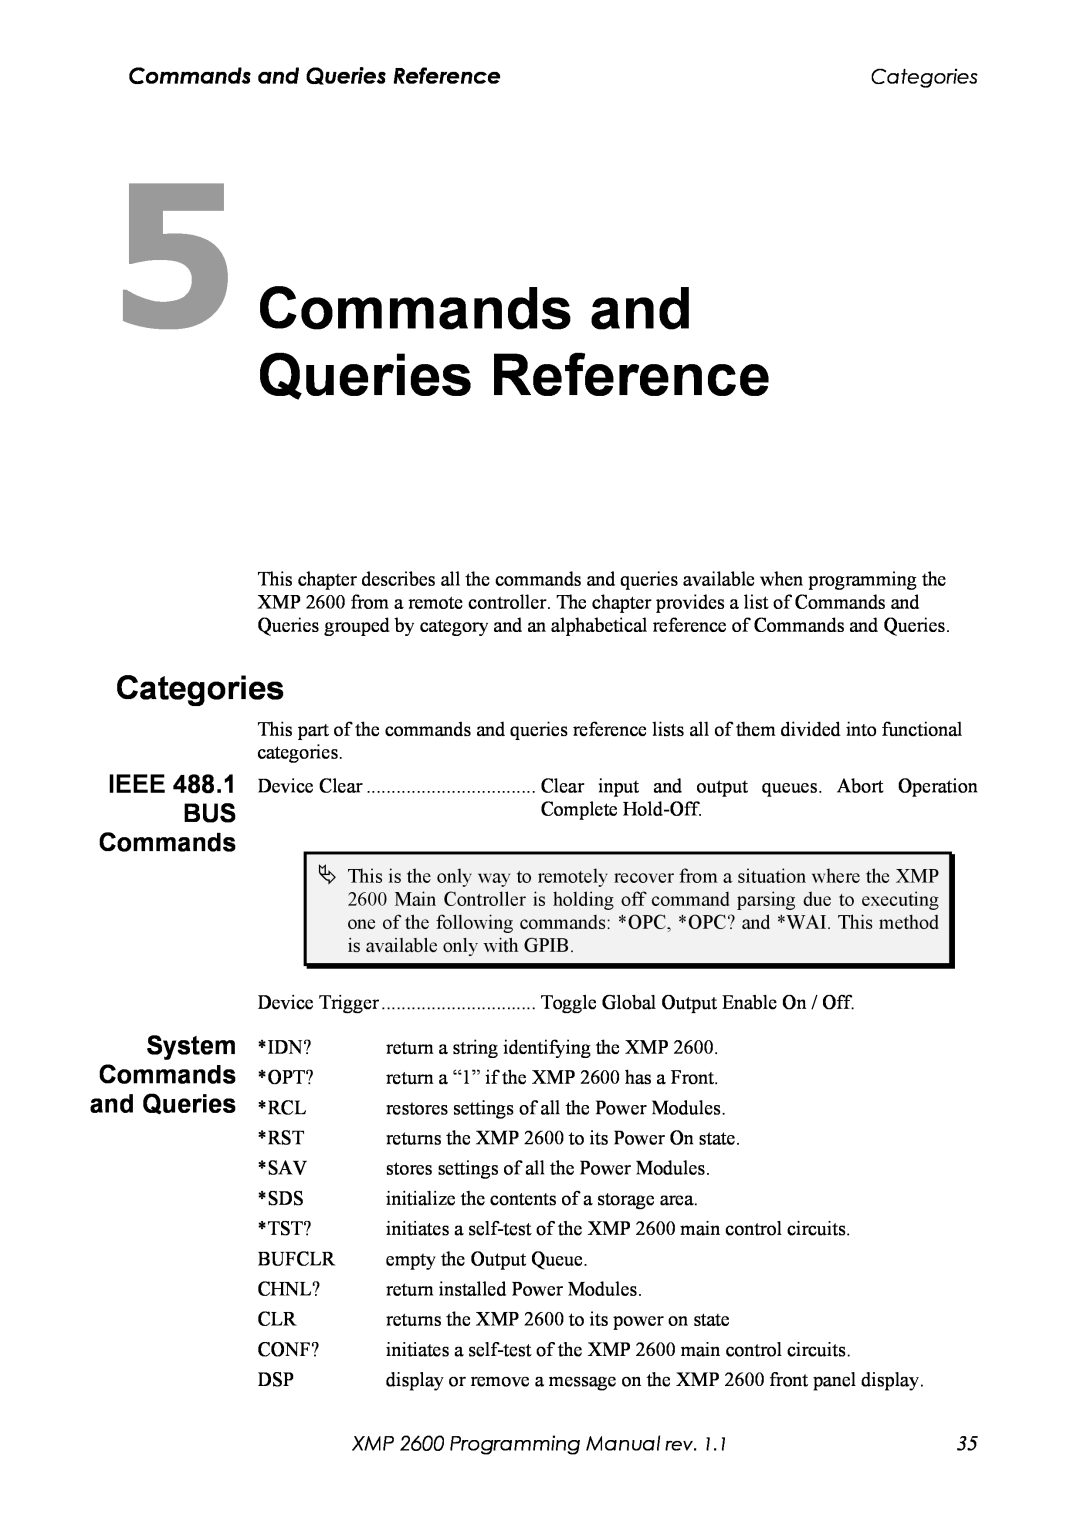 Xantrex Technology XMP 2600 manual 5Commands and Queries Reference, Categories, IEEE 488.1 BUS Commands 